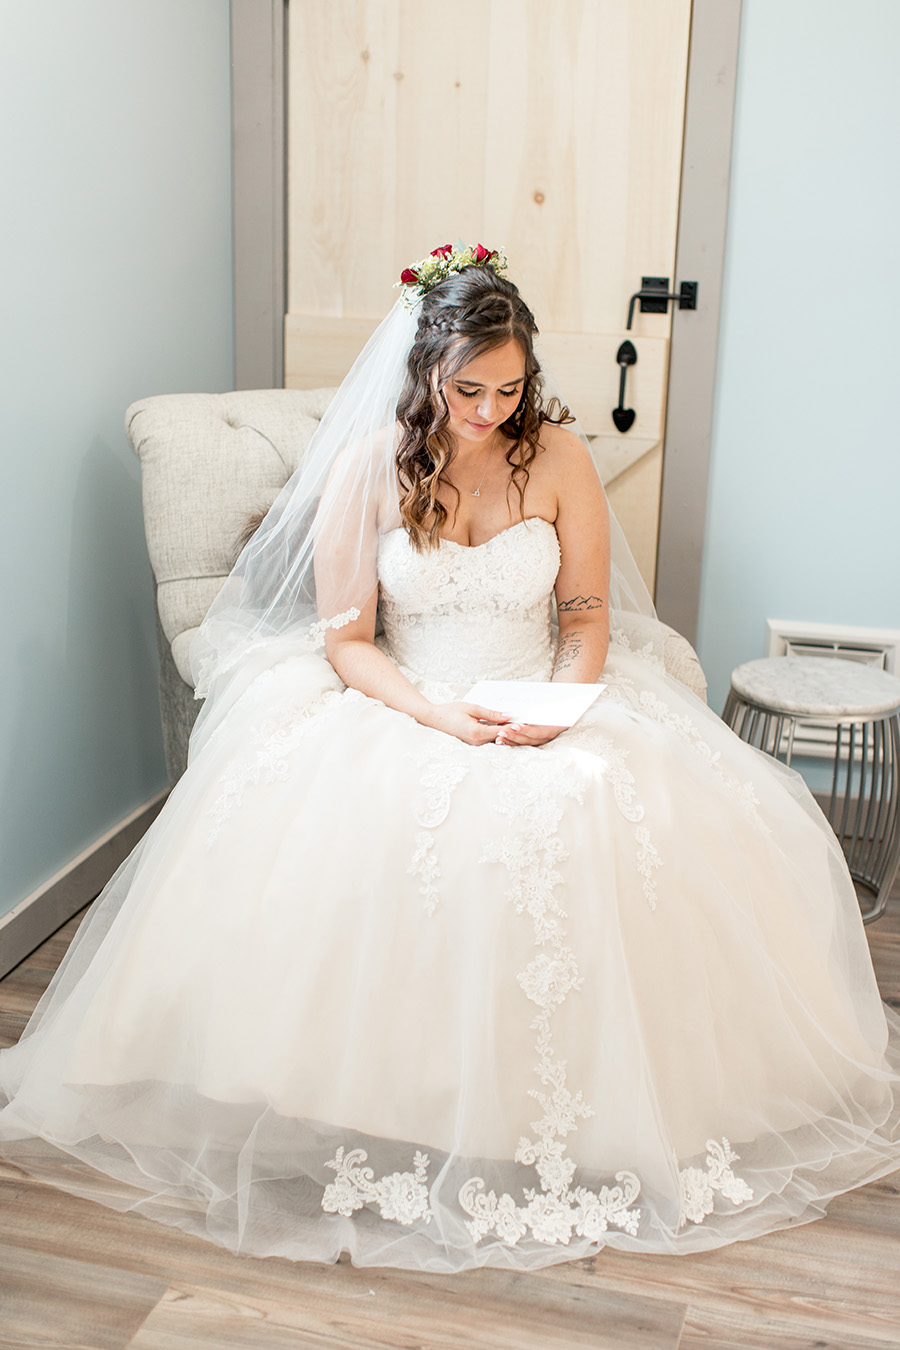 bride reading a letter to her groom on her wedding day